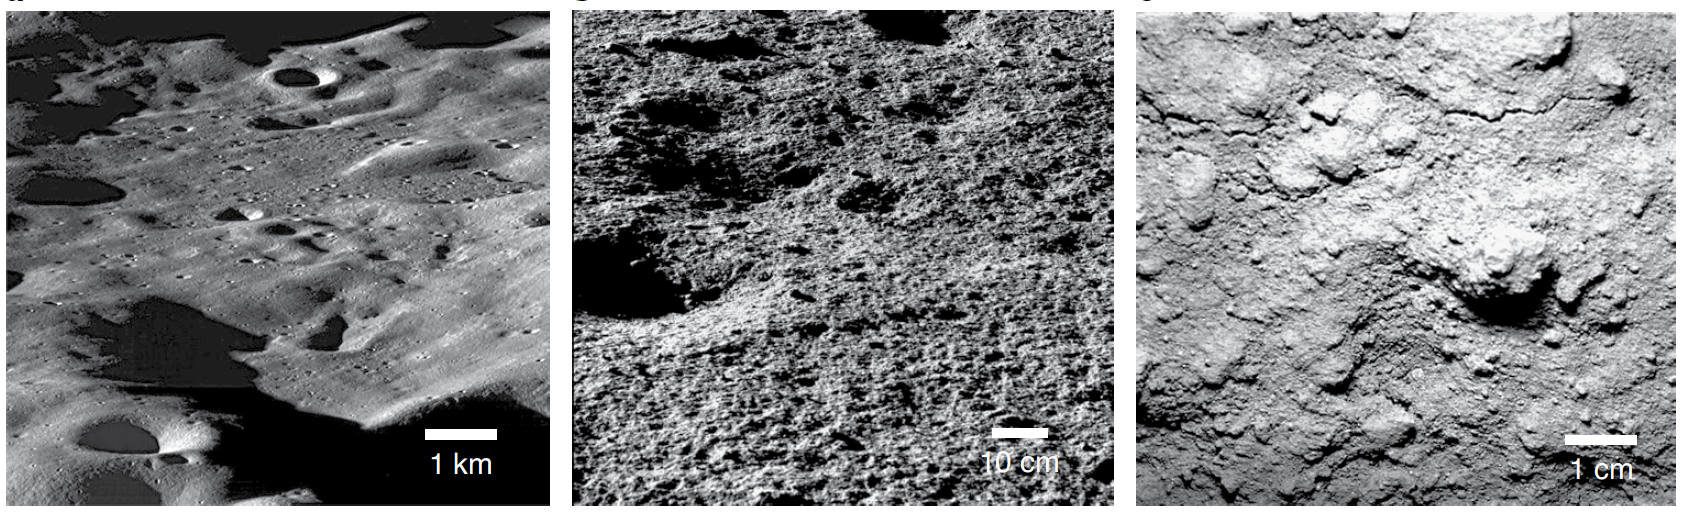 Examples of cold traps on the moon, in which areas are perpetually cast in shade.  (Image: P. O. Hayne et al., 2020/NASA)